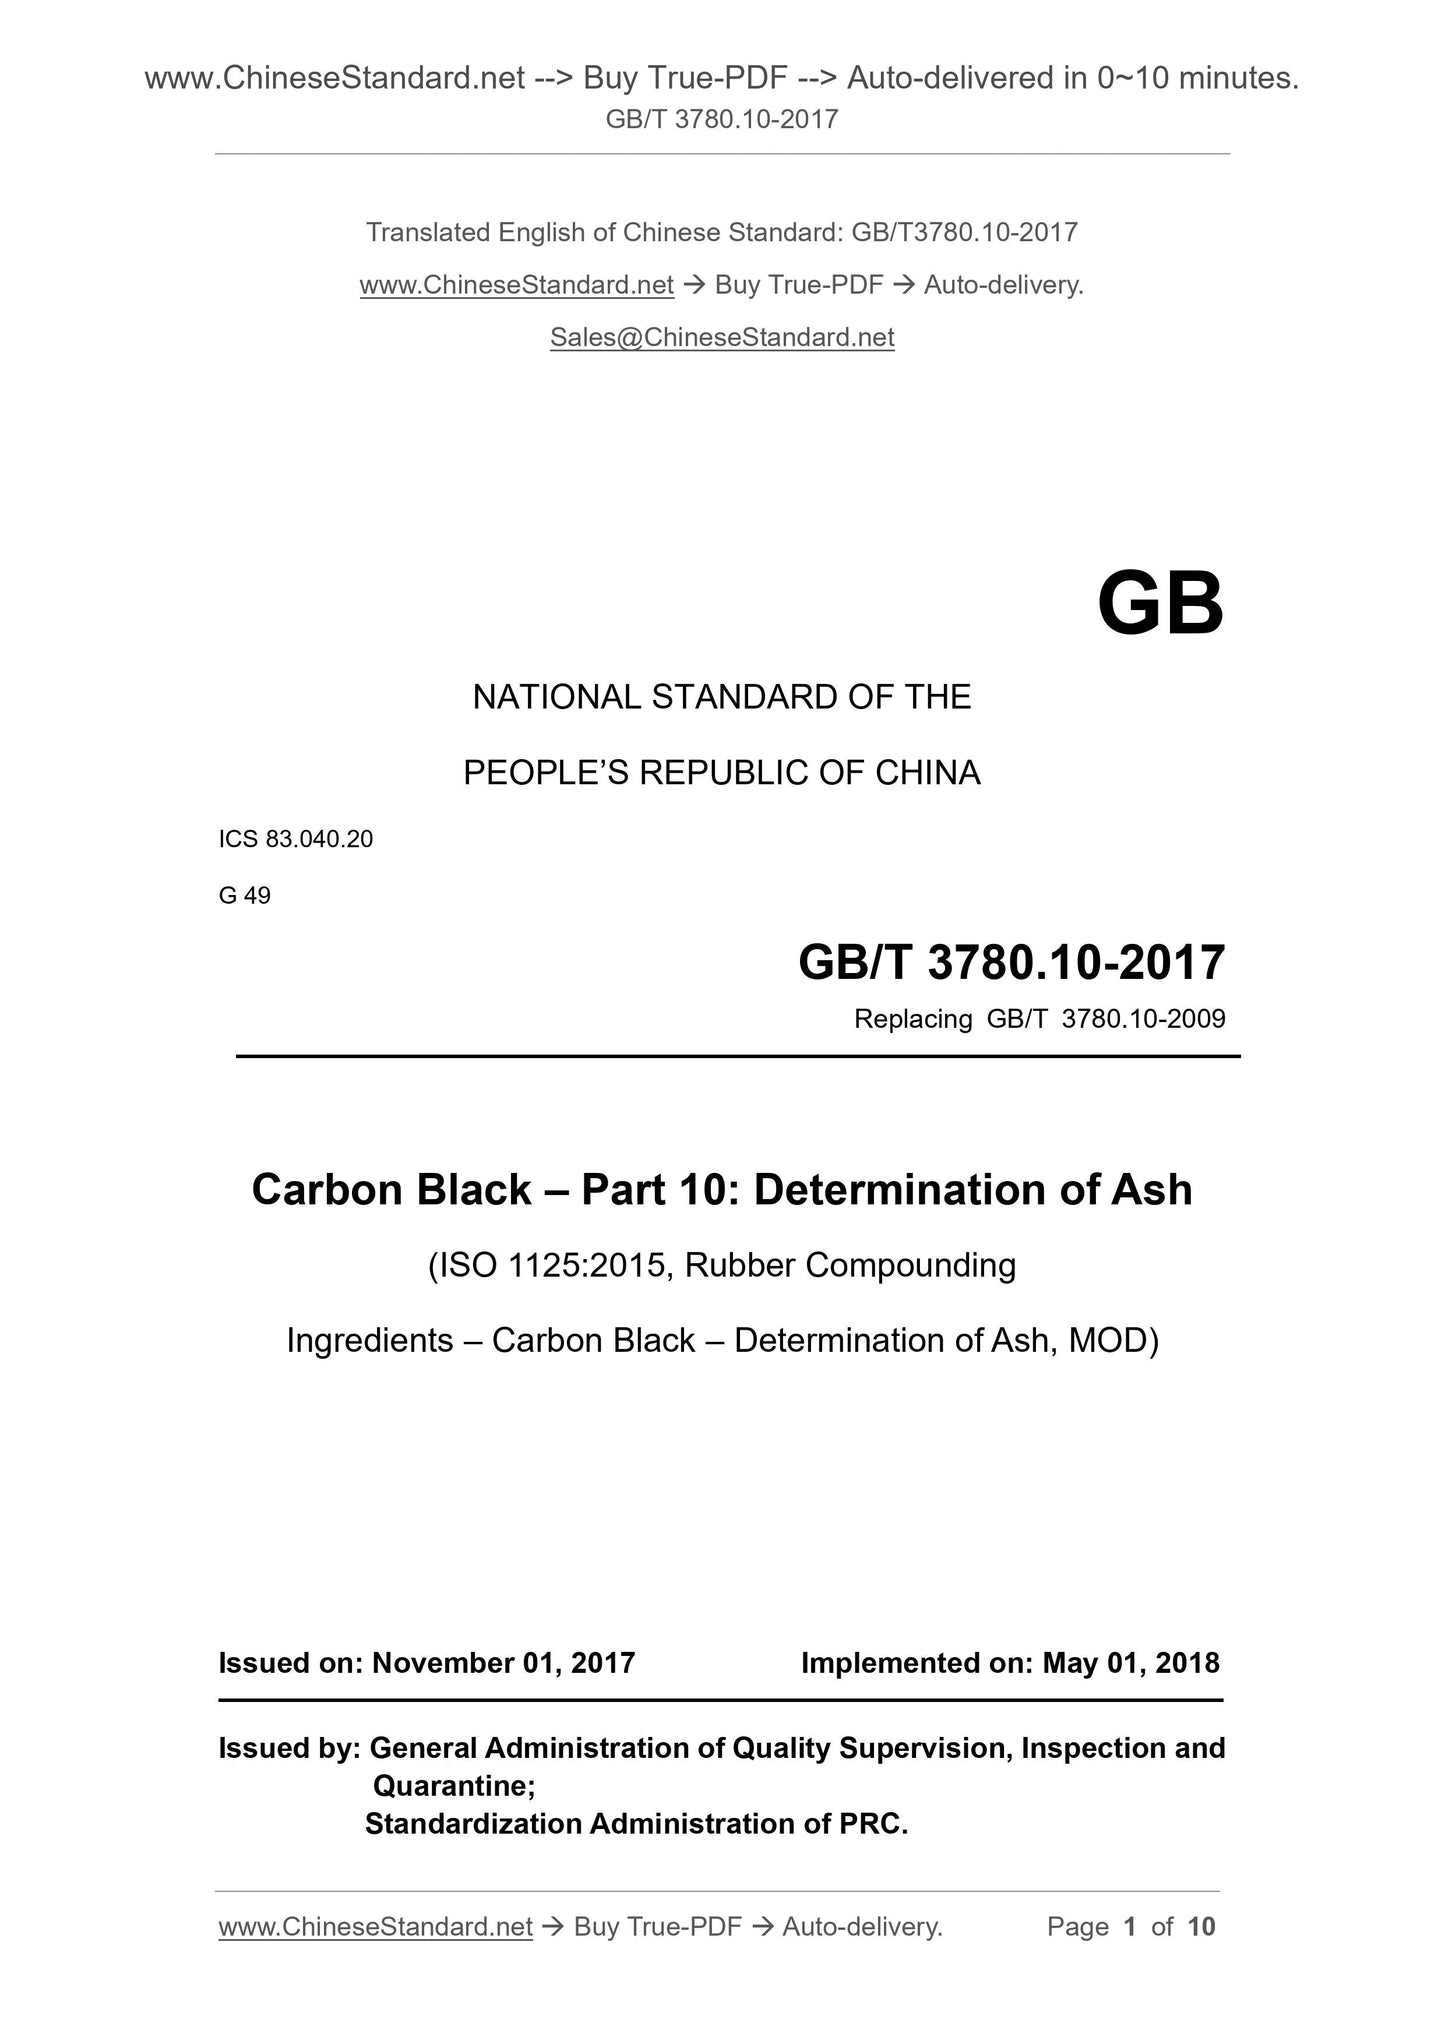 GB/T 3780.10-2017 Page 1